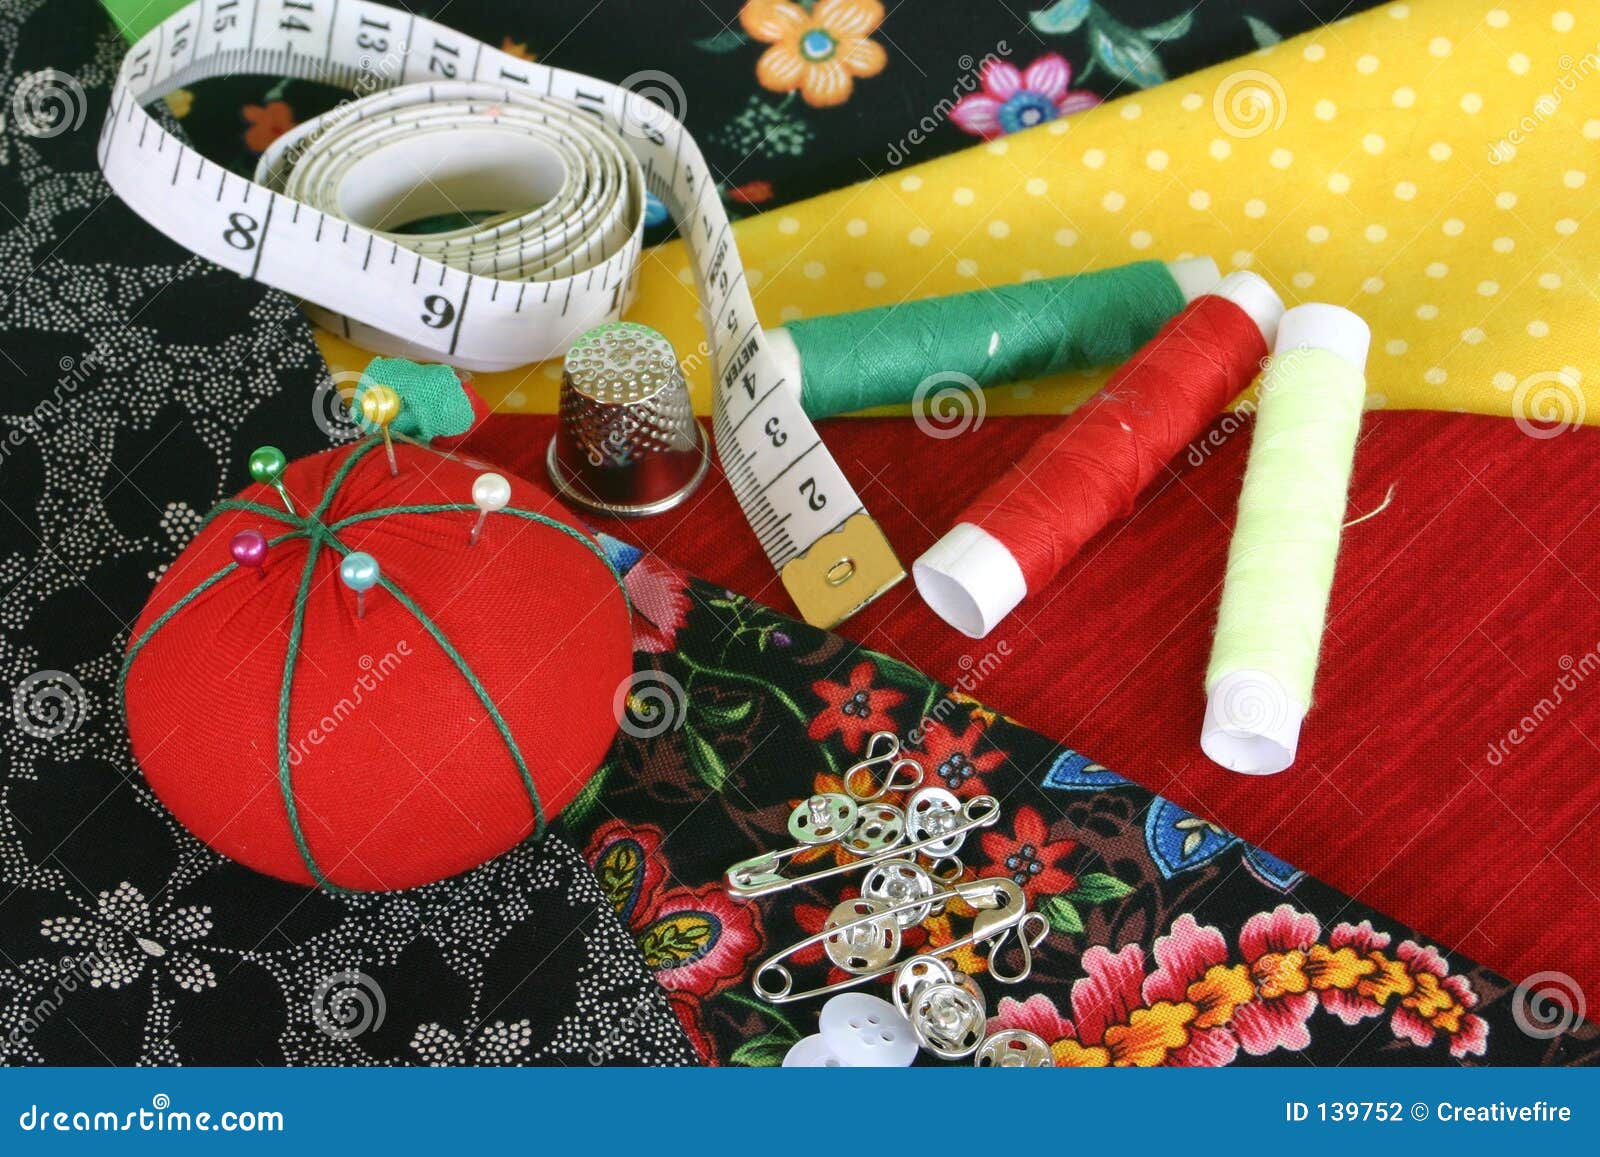 Multicolored Sewing Materials Stock Photo, Picture and Royalty Free Image.  Image 75203400.